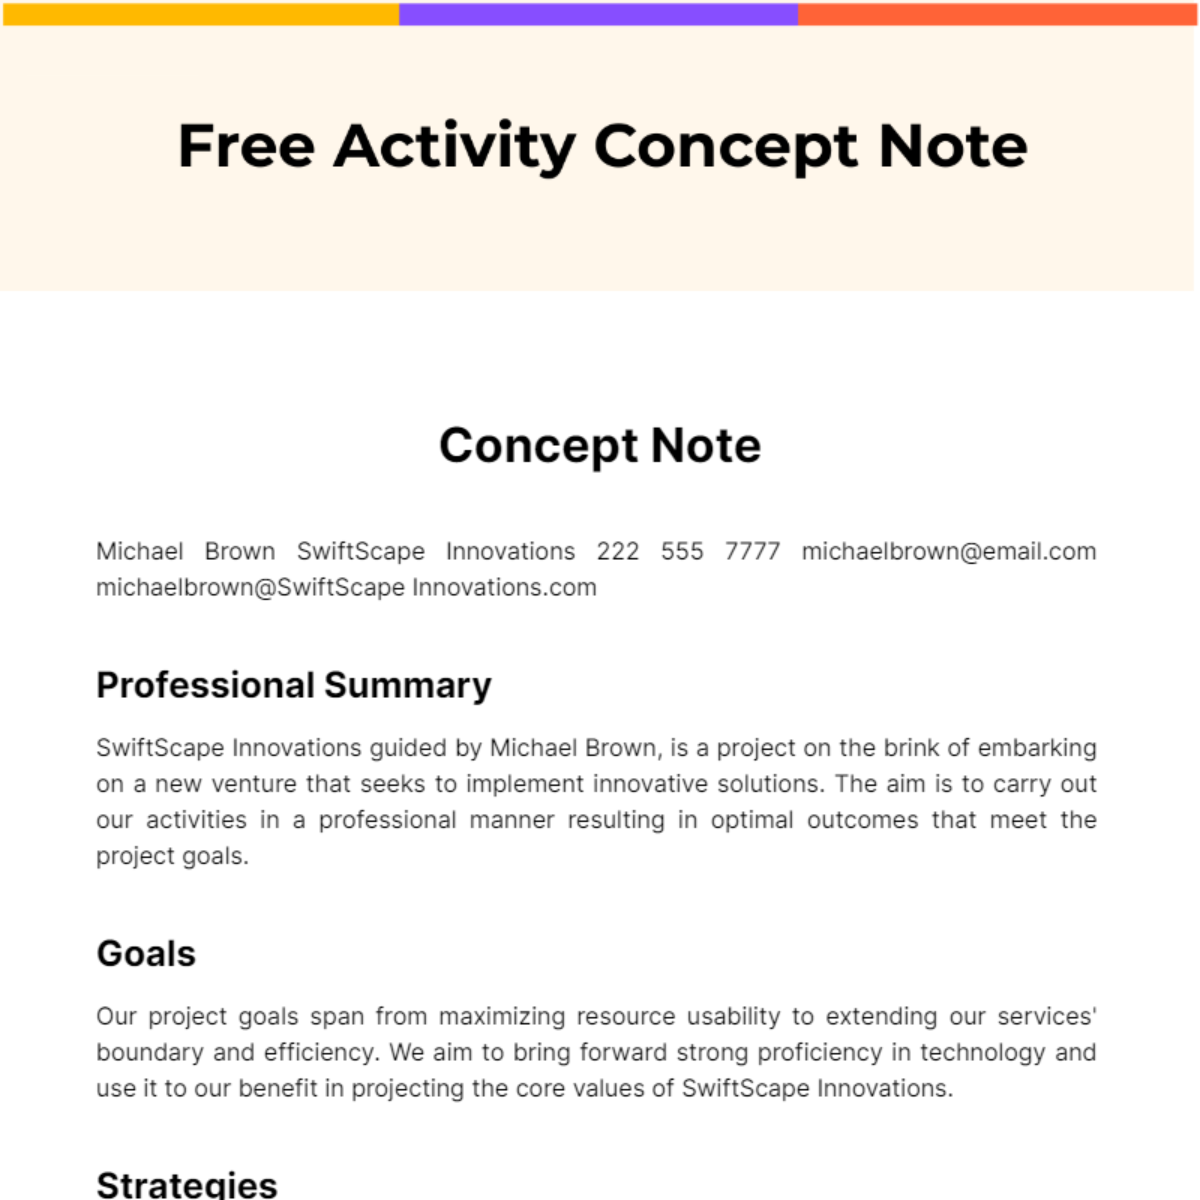 Free Activity Concept Note Template